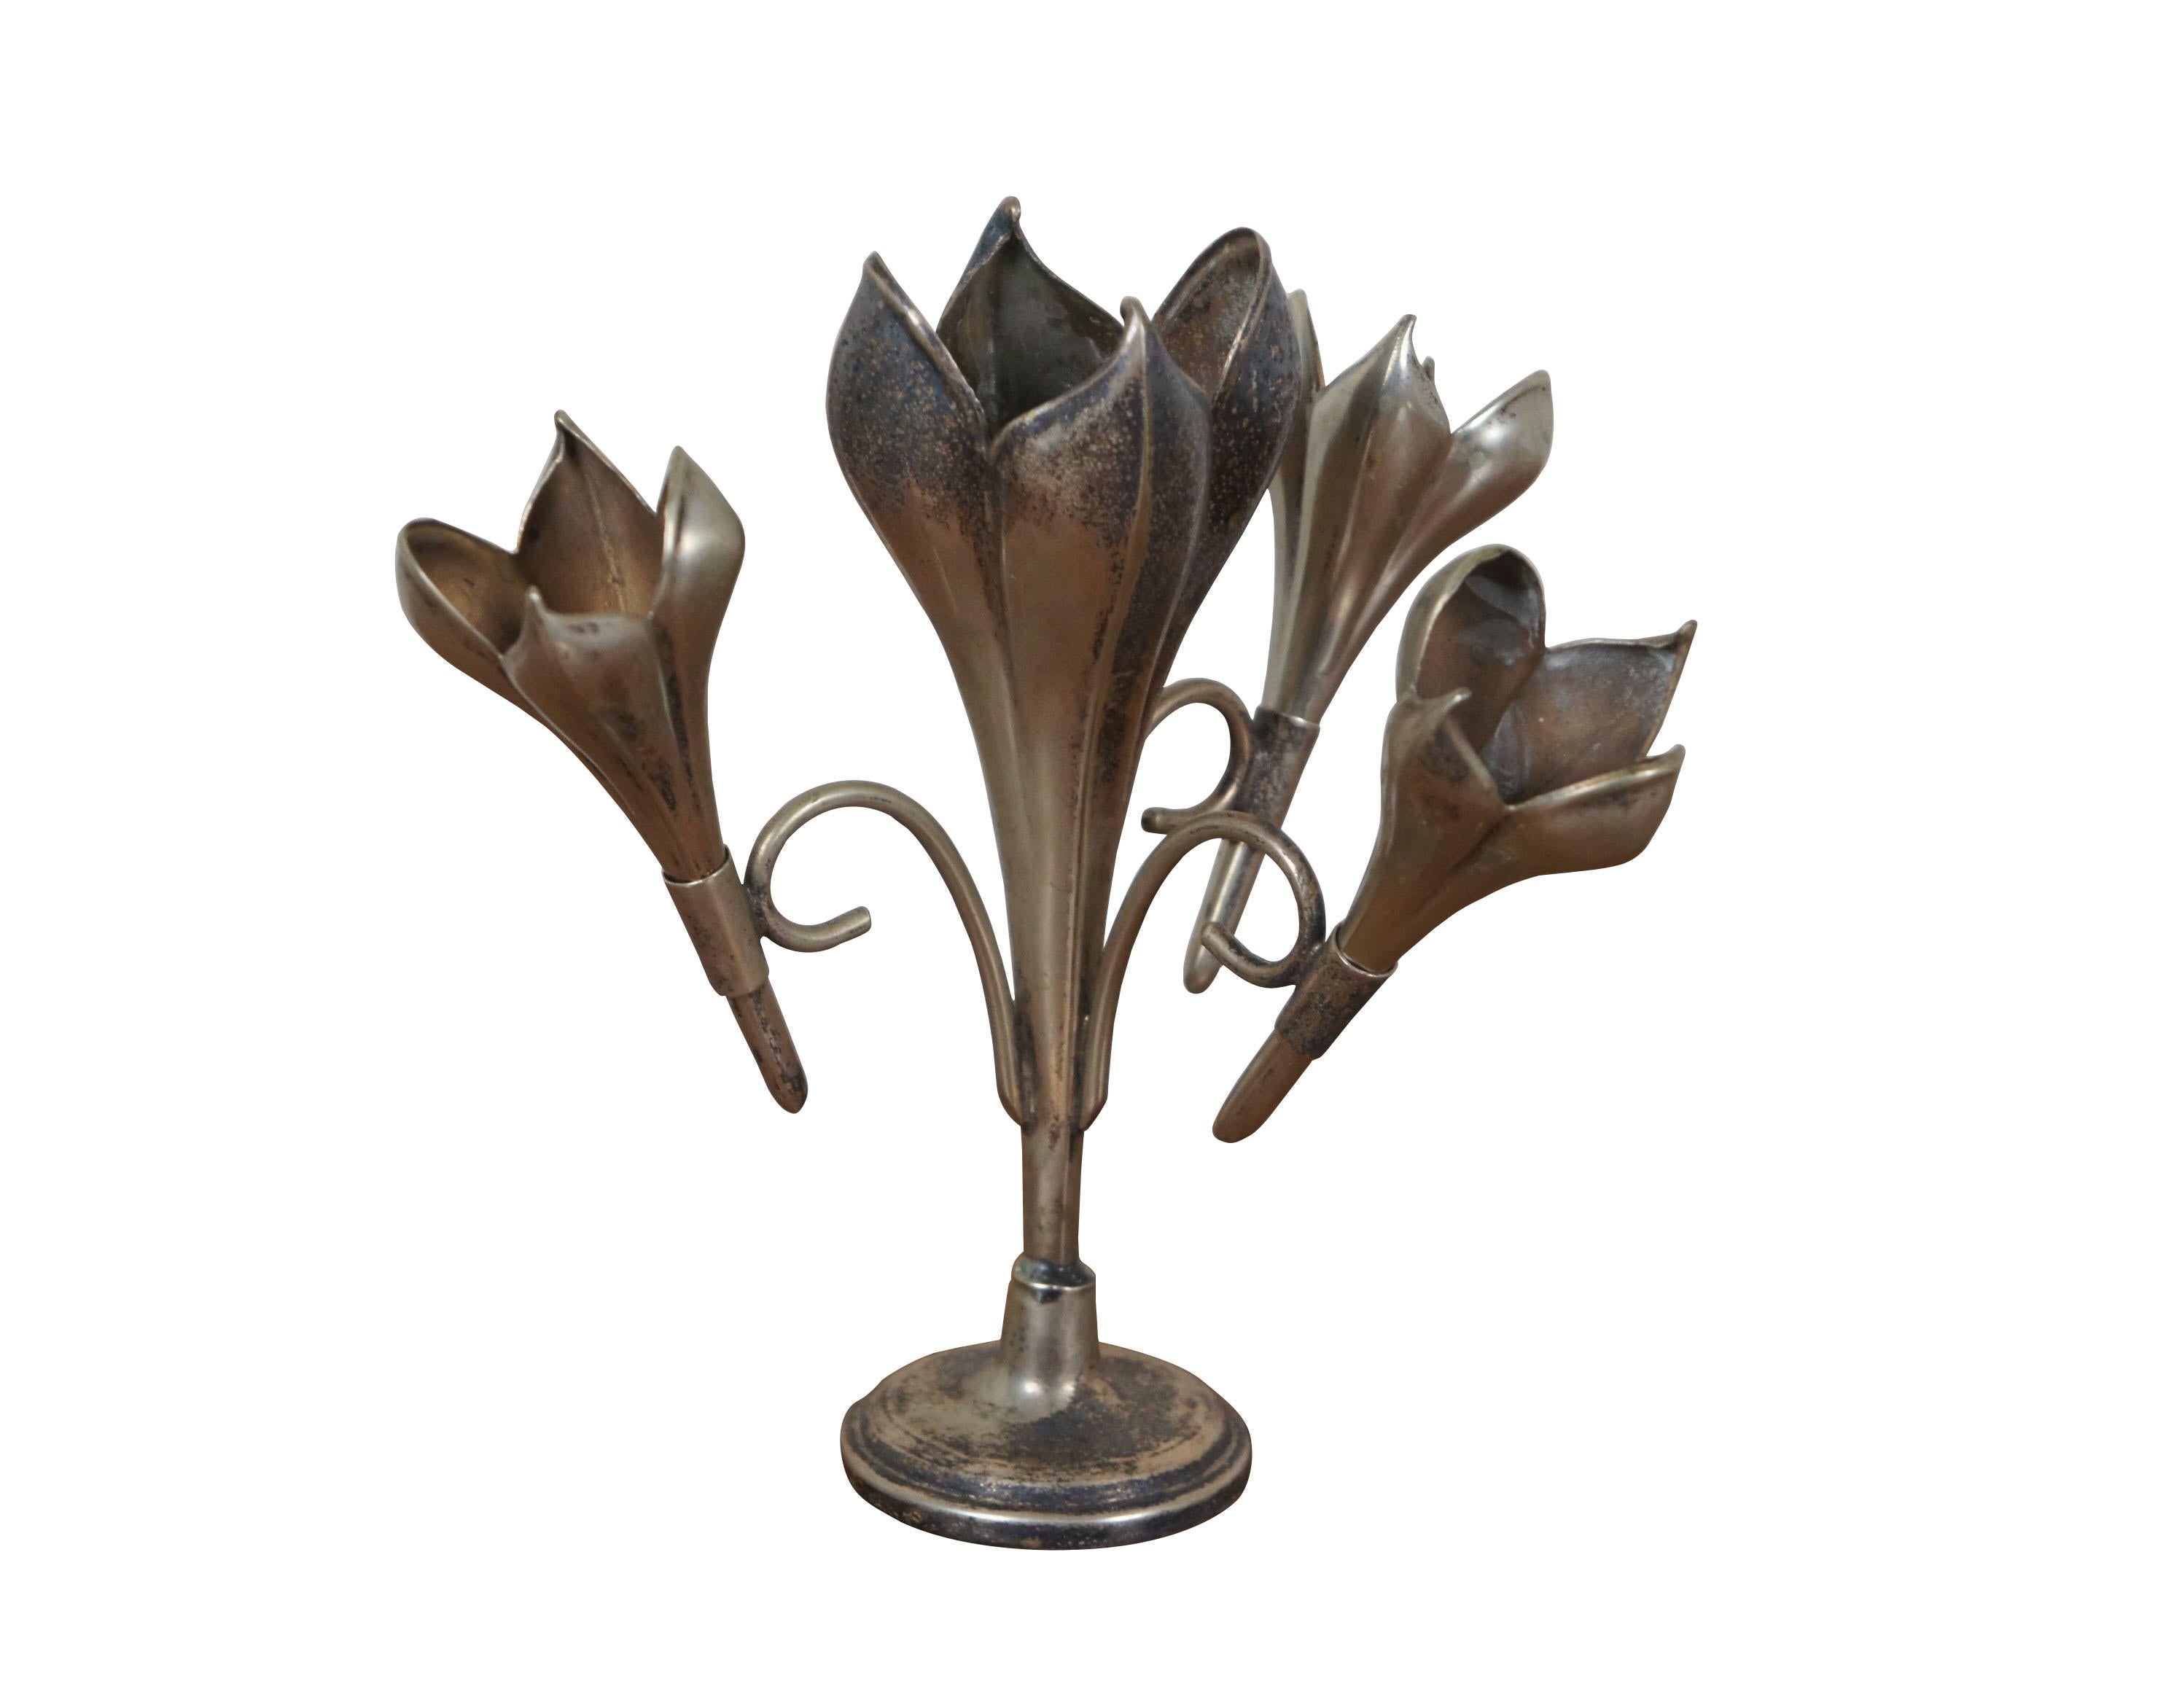 Early 20th century art nouveau silver plated epergne / bud vase. Round pedestal base supporting central crocus blossom / trumpet shaped vase and three smaller trumpets / blossoms in scrolled supports. Base marked 9711-4 R.

Dimensions:
8